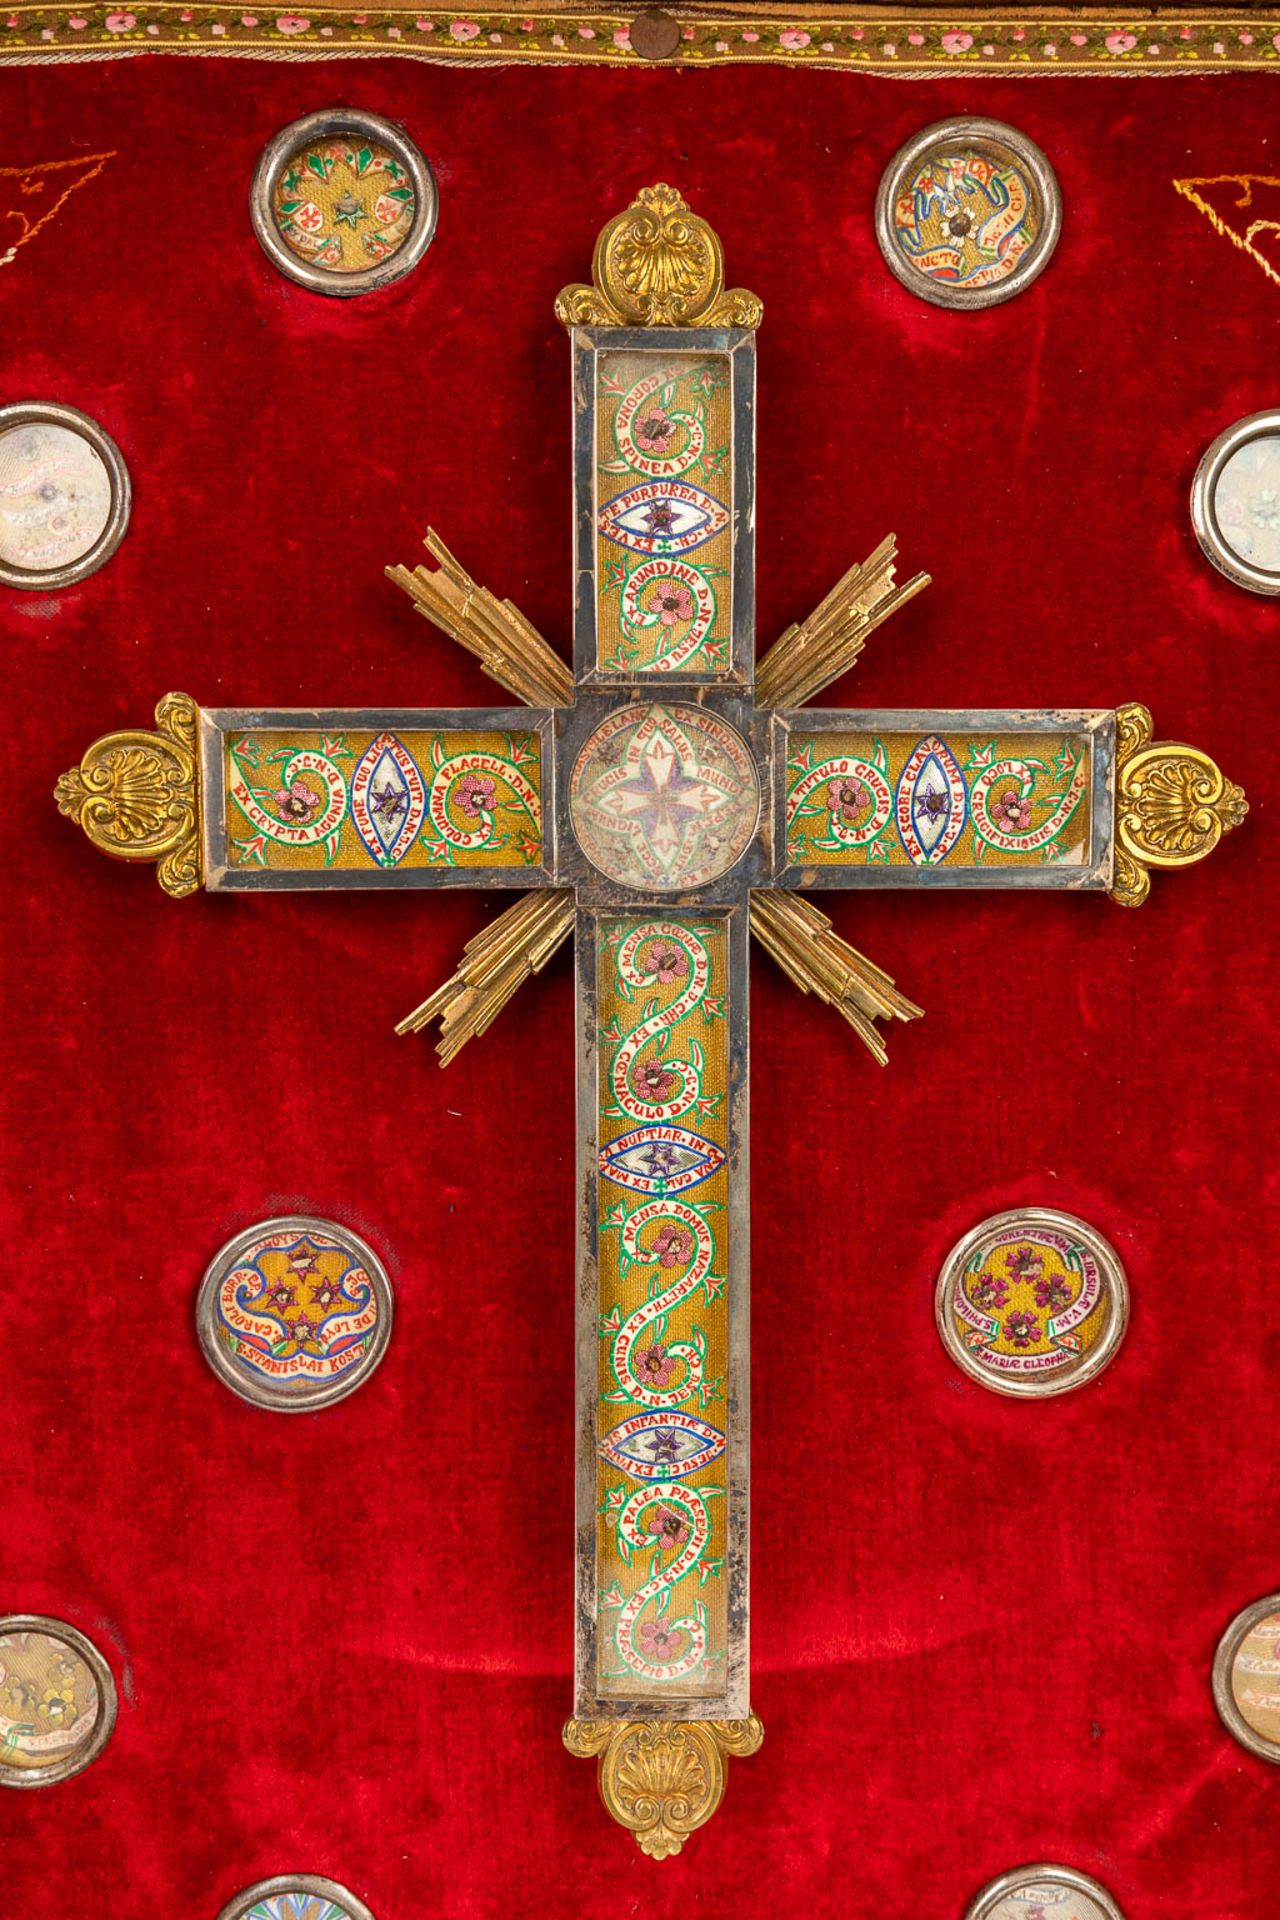 An antique reliquary box with relics a relic crucifix and embroidery. (L:13 x W:52 x H:75 cm) - Image 15 of 23